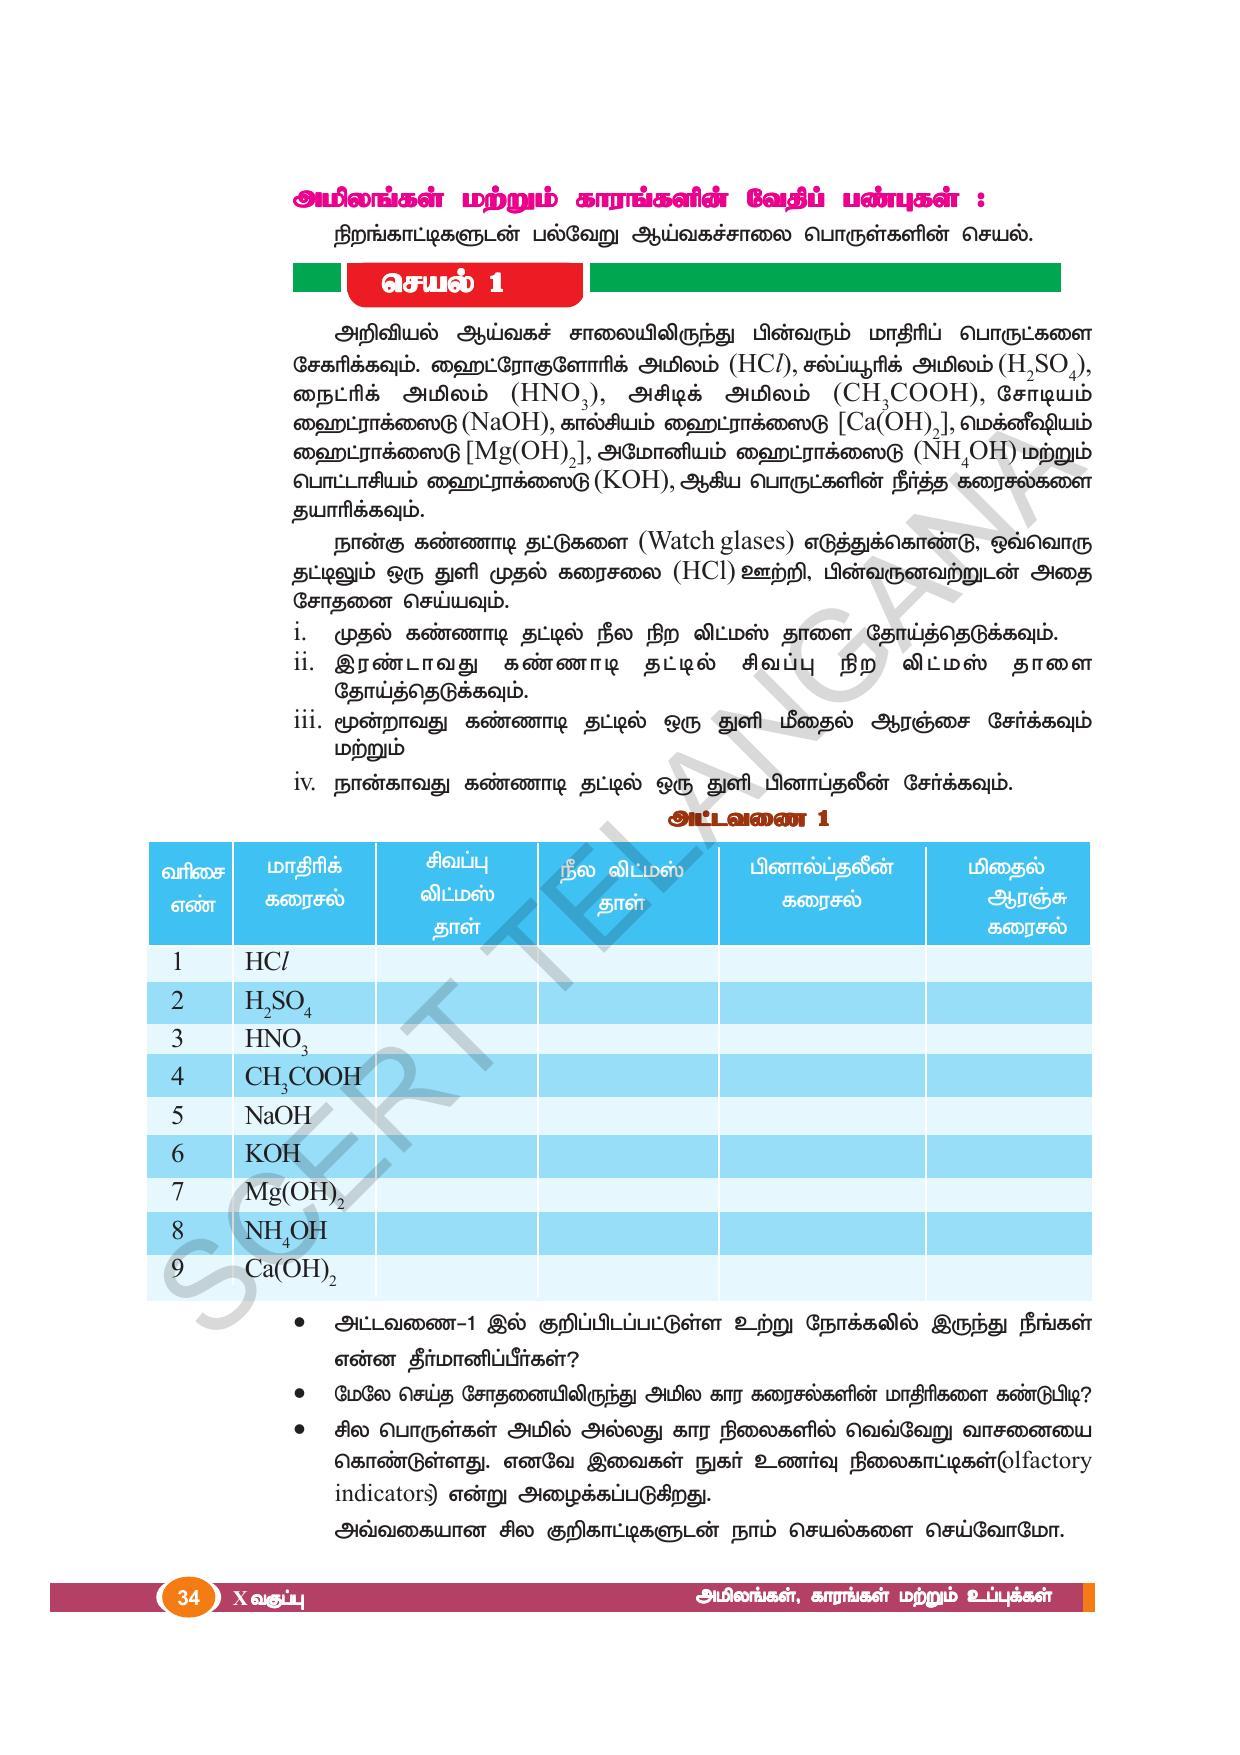 TS SCERT Class 10 Physical Science(Tamil Medium) Text Book - Page 46